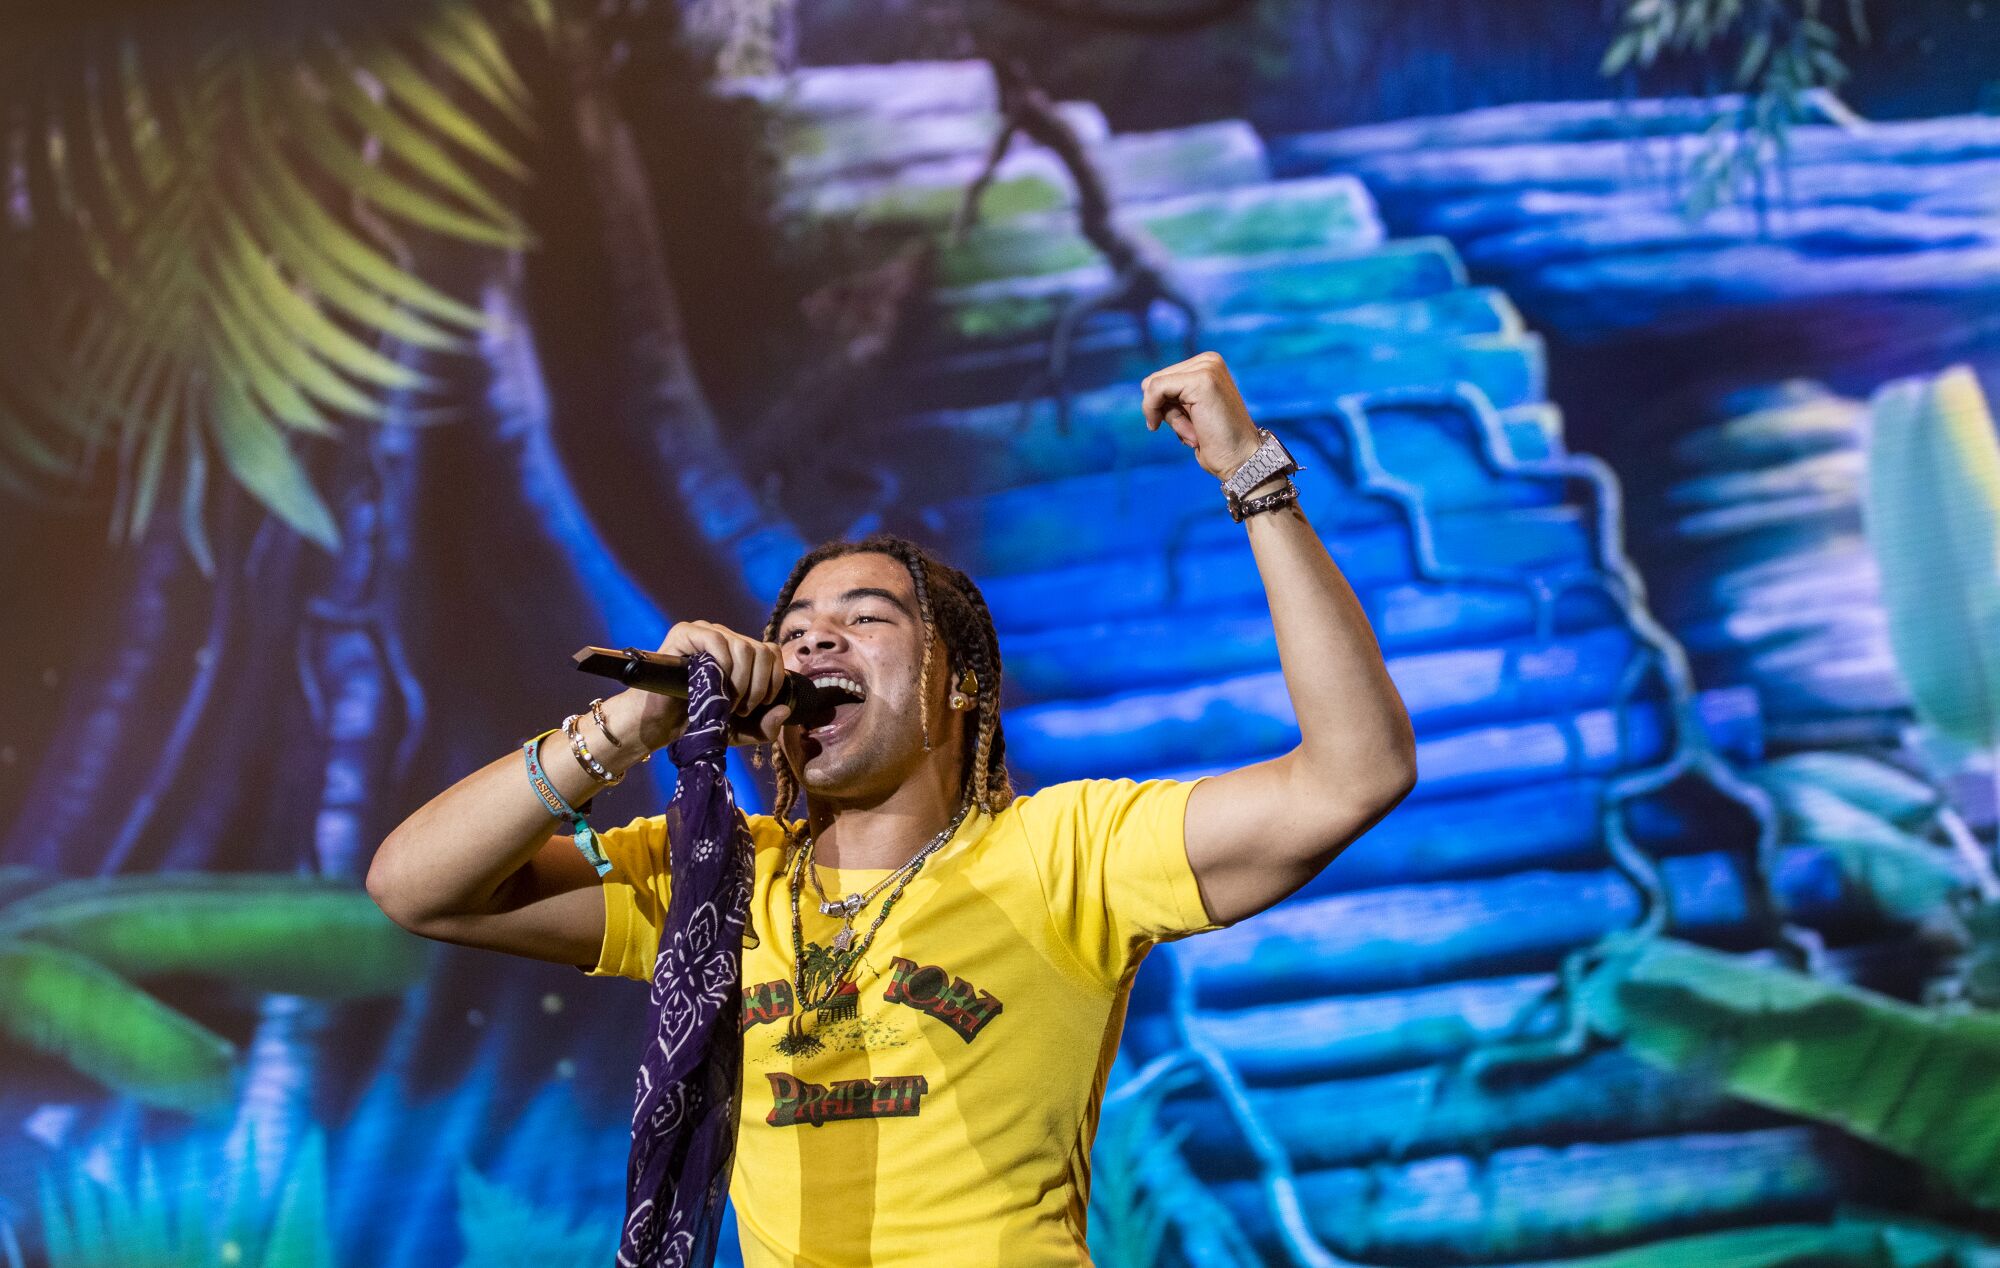 A man in a yellow shirt sings into a mic, which he holds in his right hand along with a bandana, and raises his left hand 